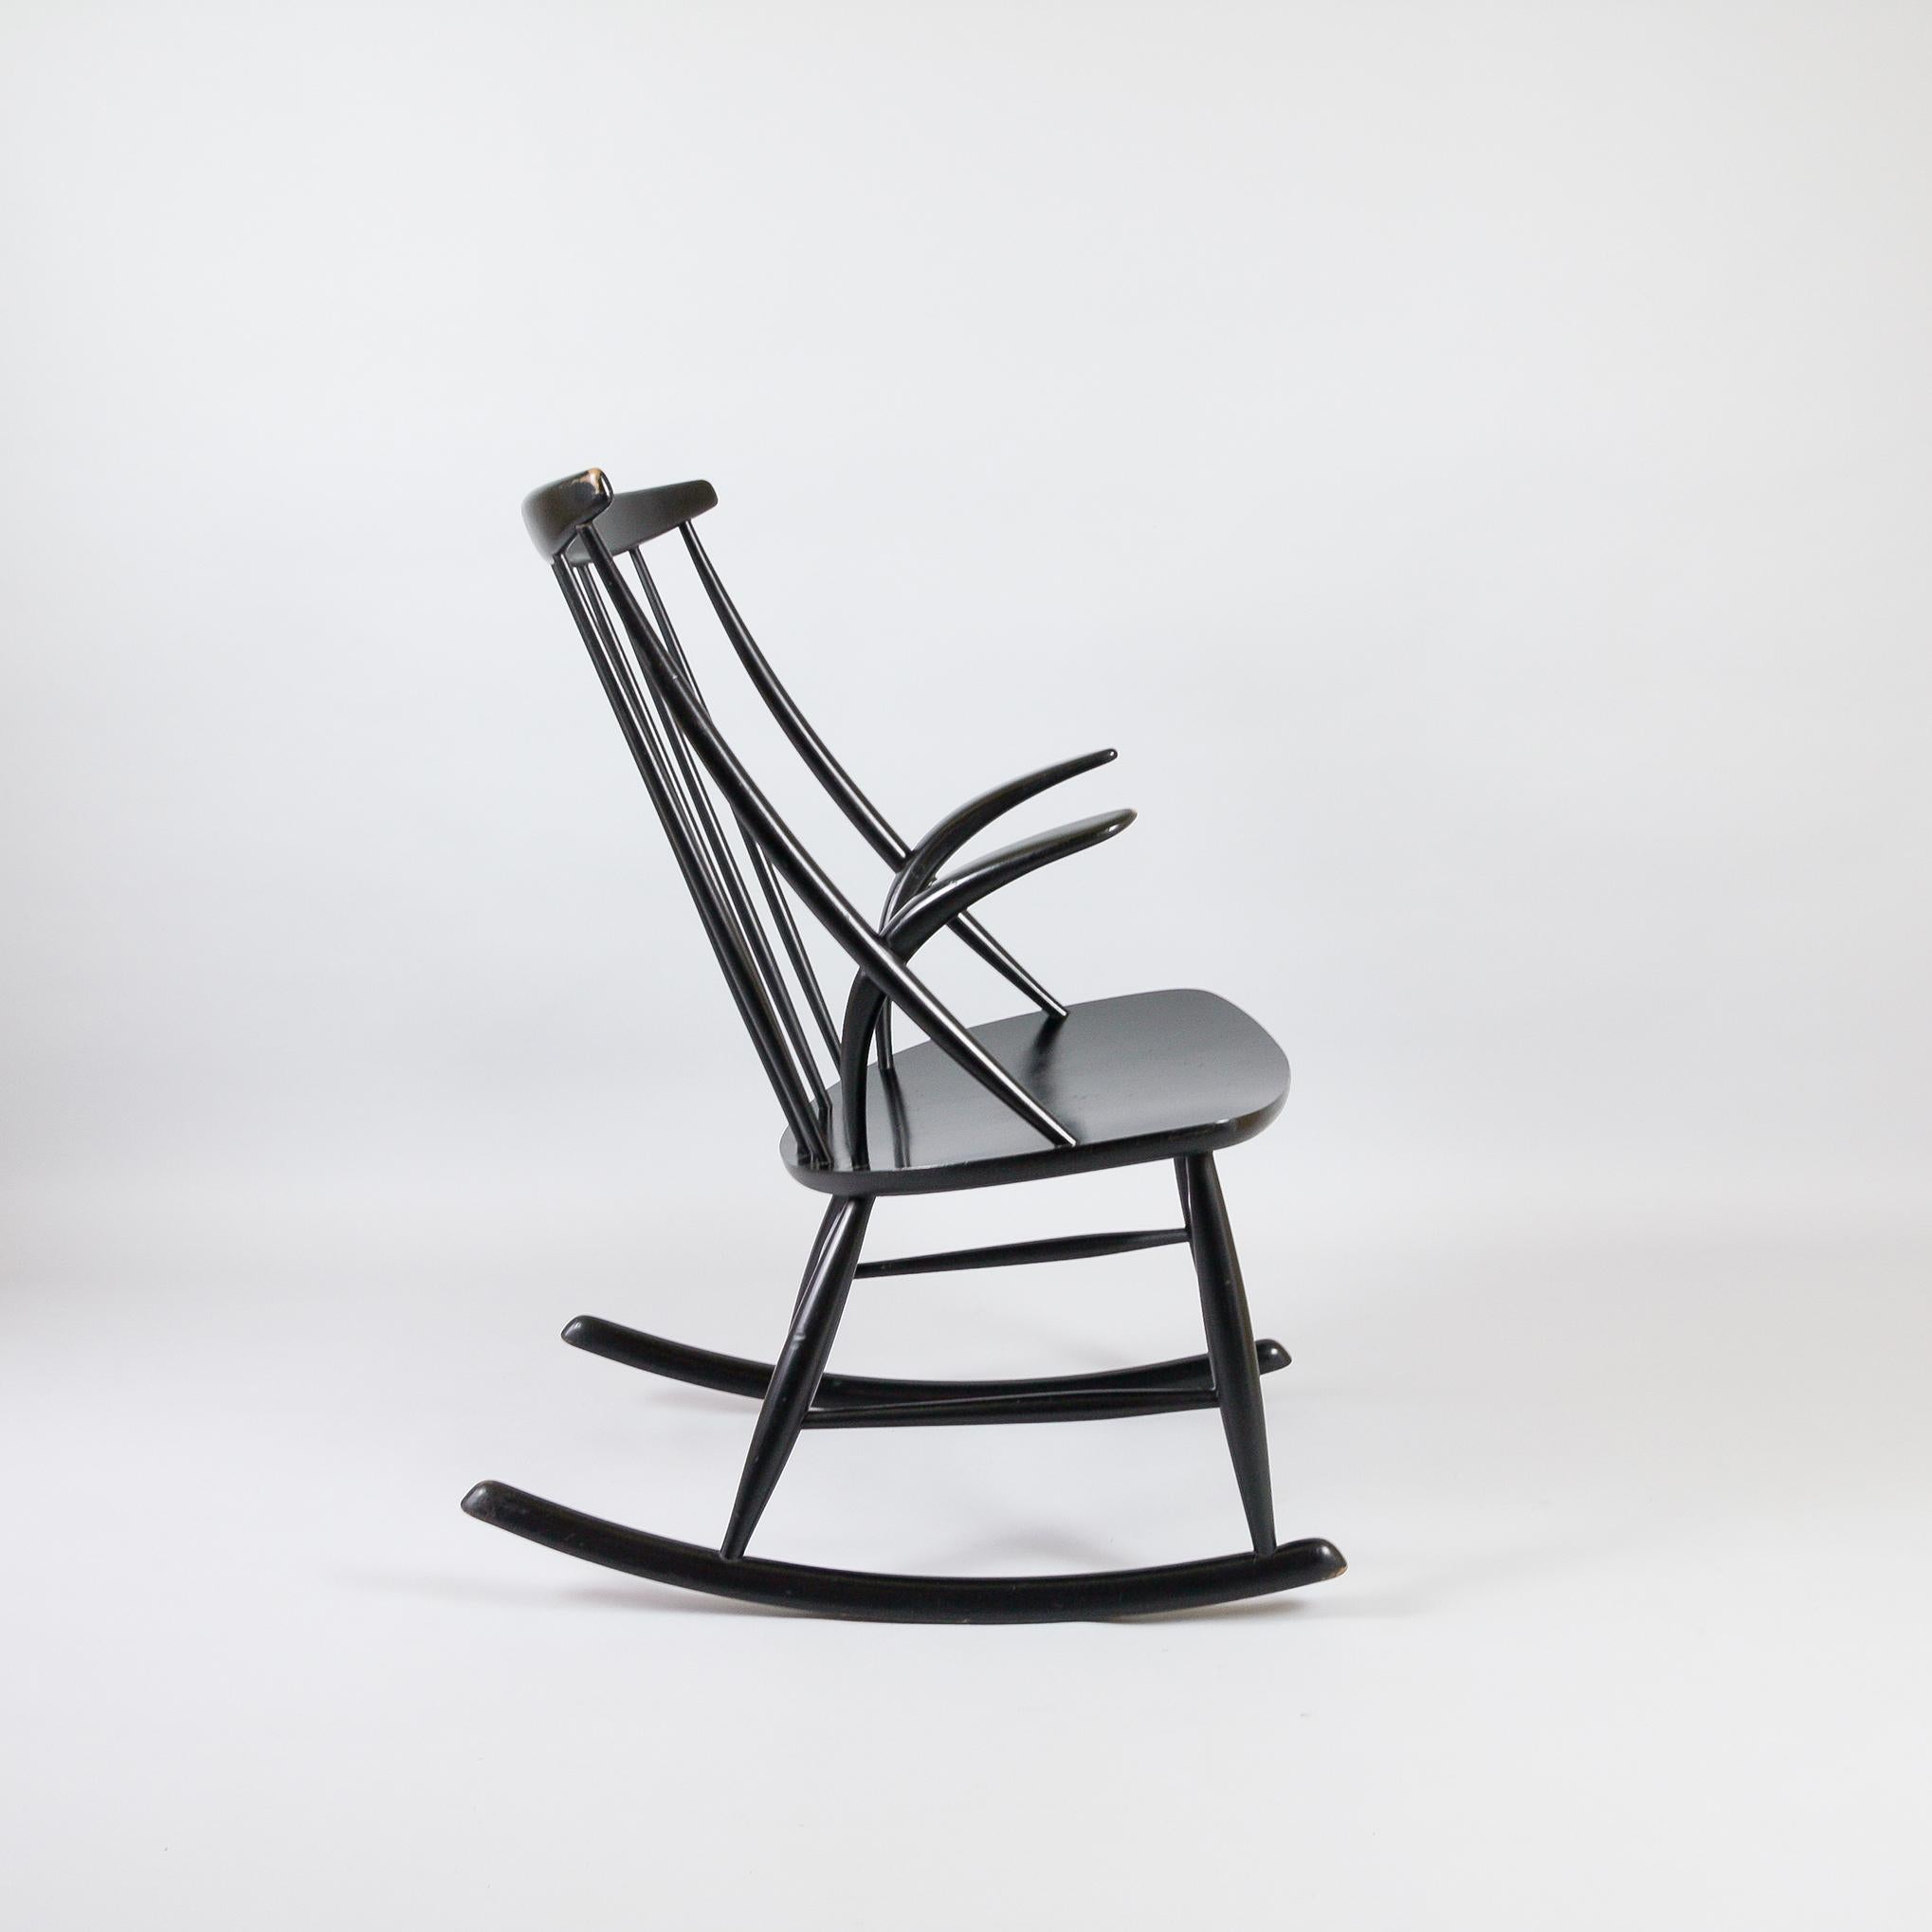 Black lacquered Illum Wikkelsø Gyngestol No.3 rocking chair manufactured by Niels Eilerson. Designed 1958. Spindle back with distinctive short, curved arms. This rocker is in great vintage condition with wear commensurate with age.